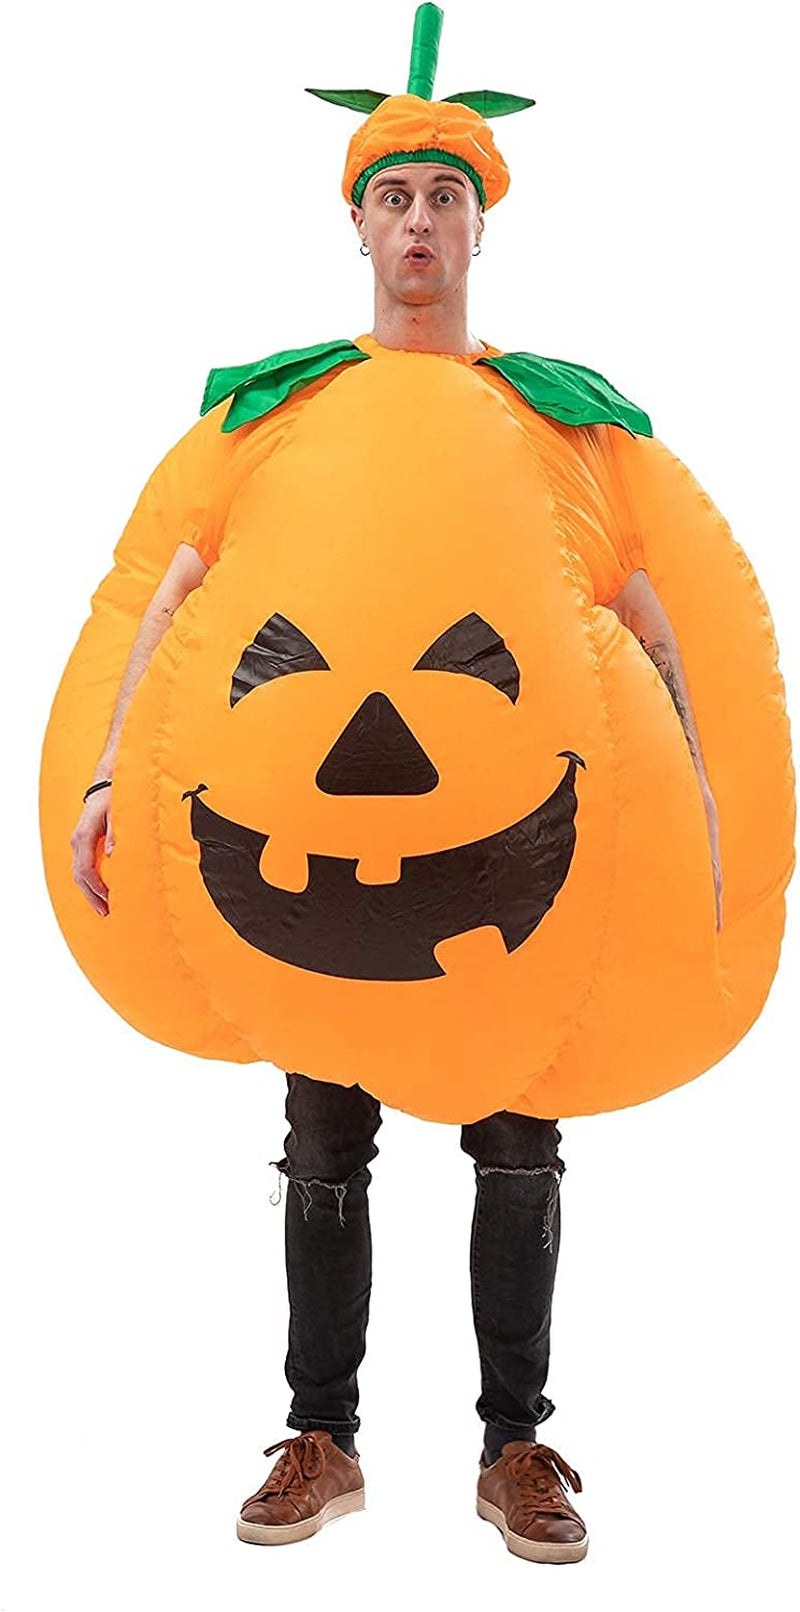 Inflatable Pumpkin Costume for Adults 4.9-5.9Ft  Does Not Apply   